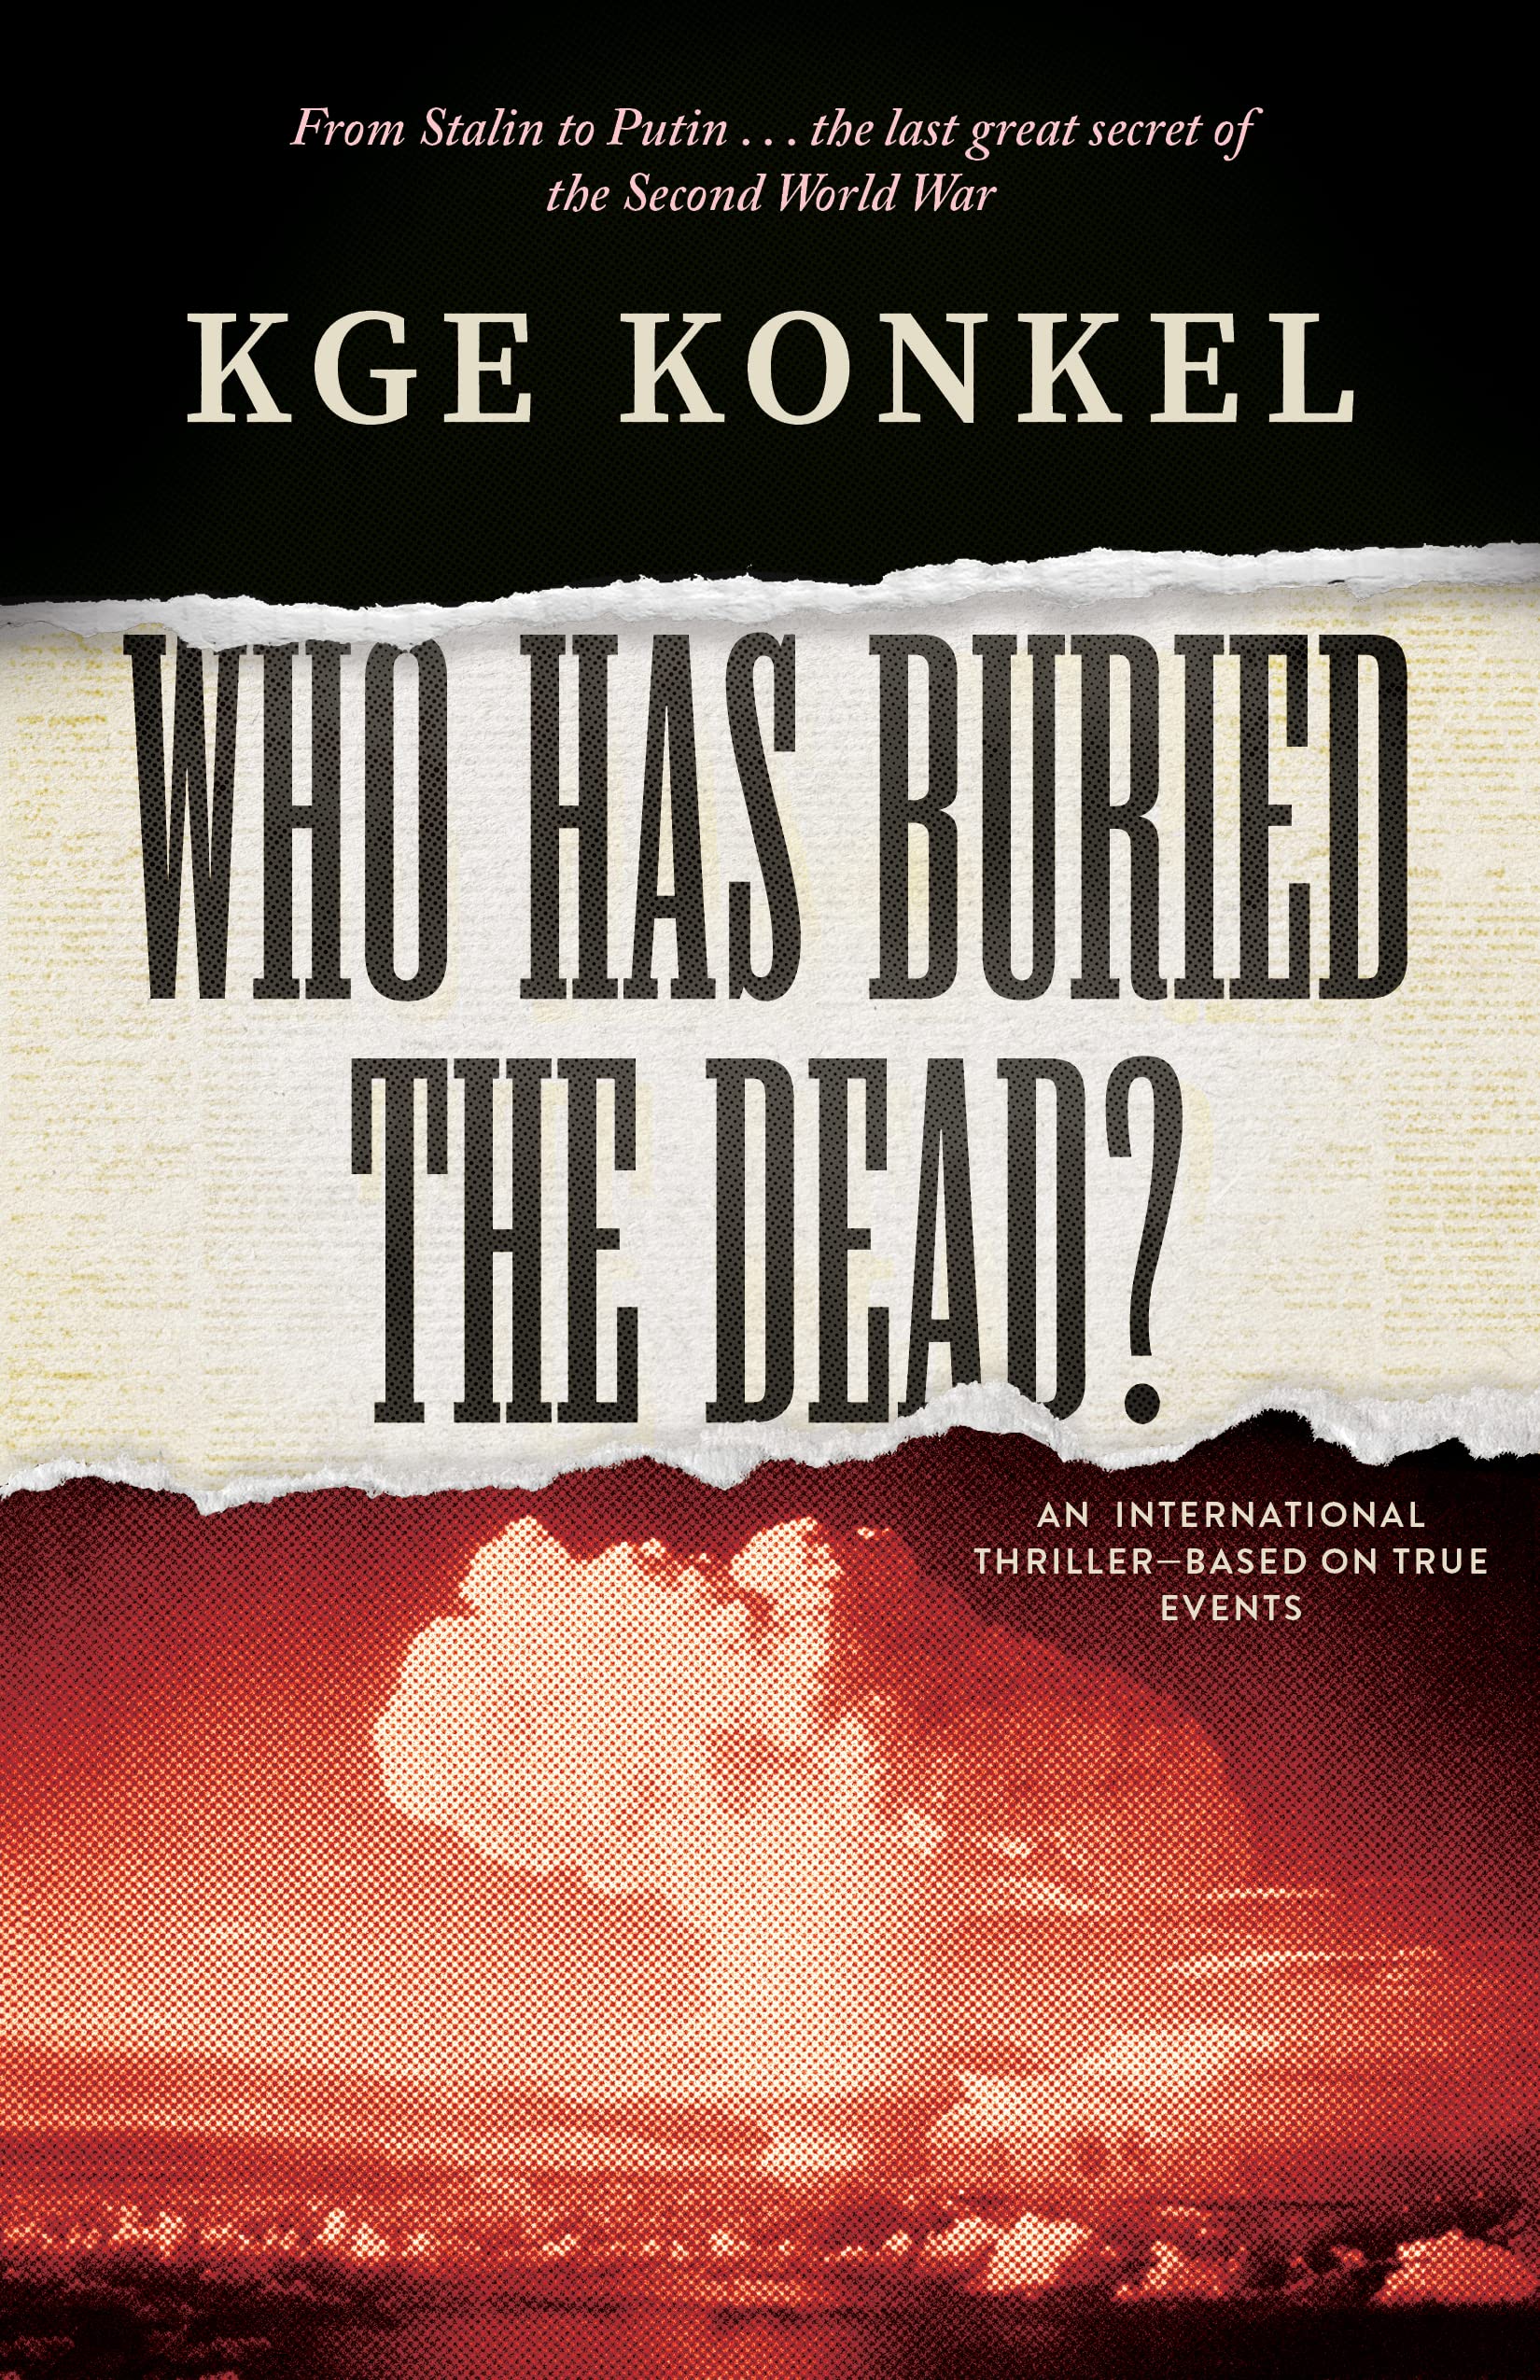 Download Who Has Buried the Dead?: From Stalin to Putin … The last great secret of World War Two PDF by K.G.E. Konkel